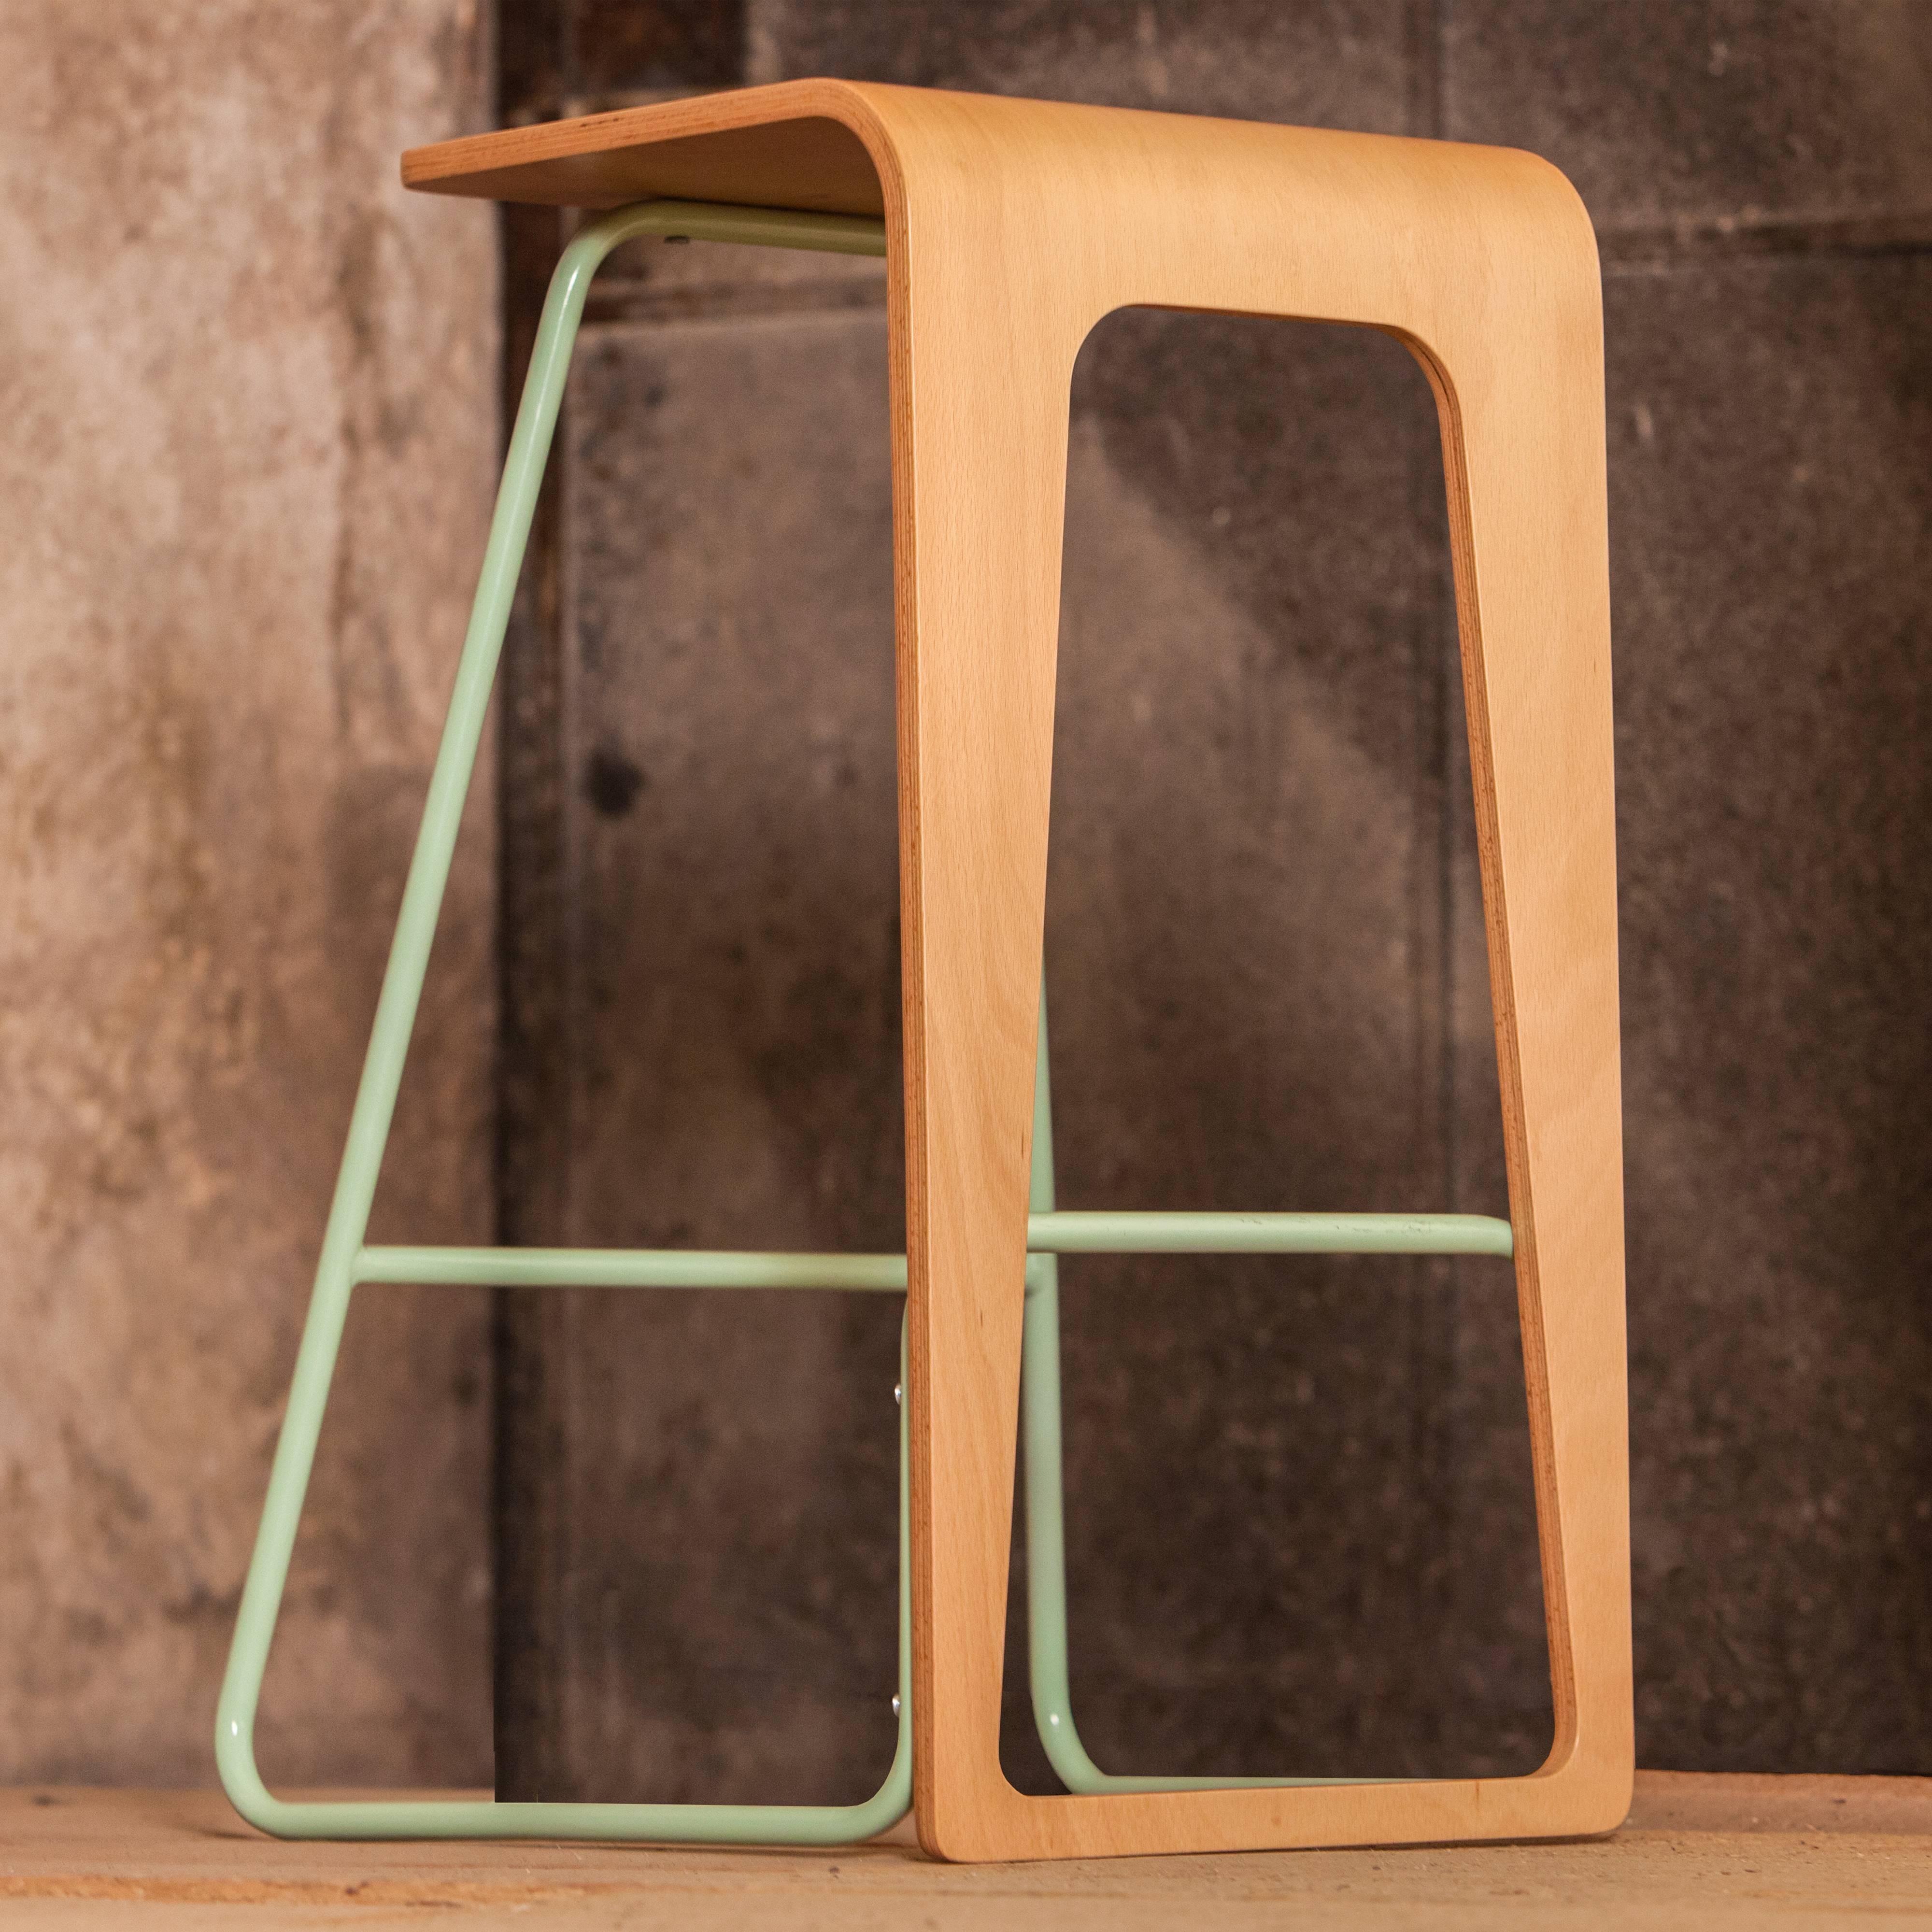 Finally an innovative bar stool!
The front rounded edge of the seat lenghtens towards the bottom like a decorative frame.
Awesome detail: the footrest very useful and comfortable…
The metal structure is available in eight colors and the wooden